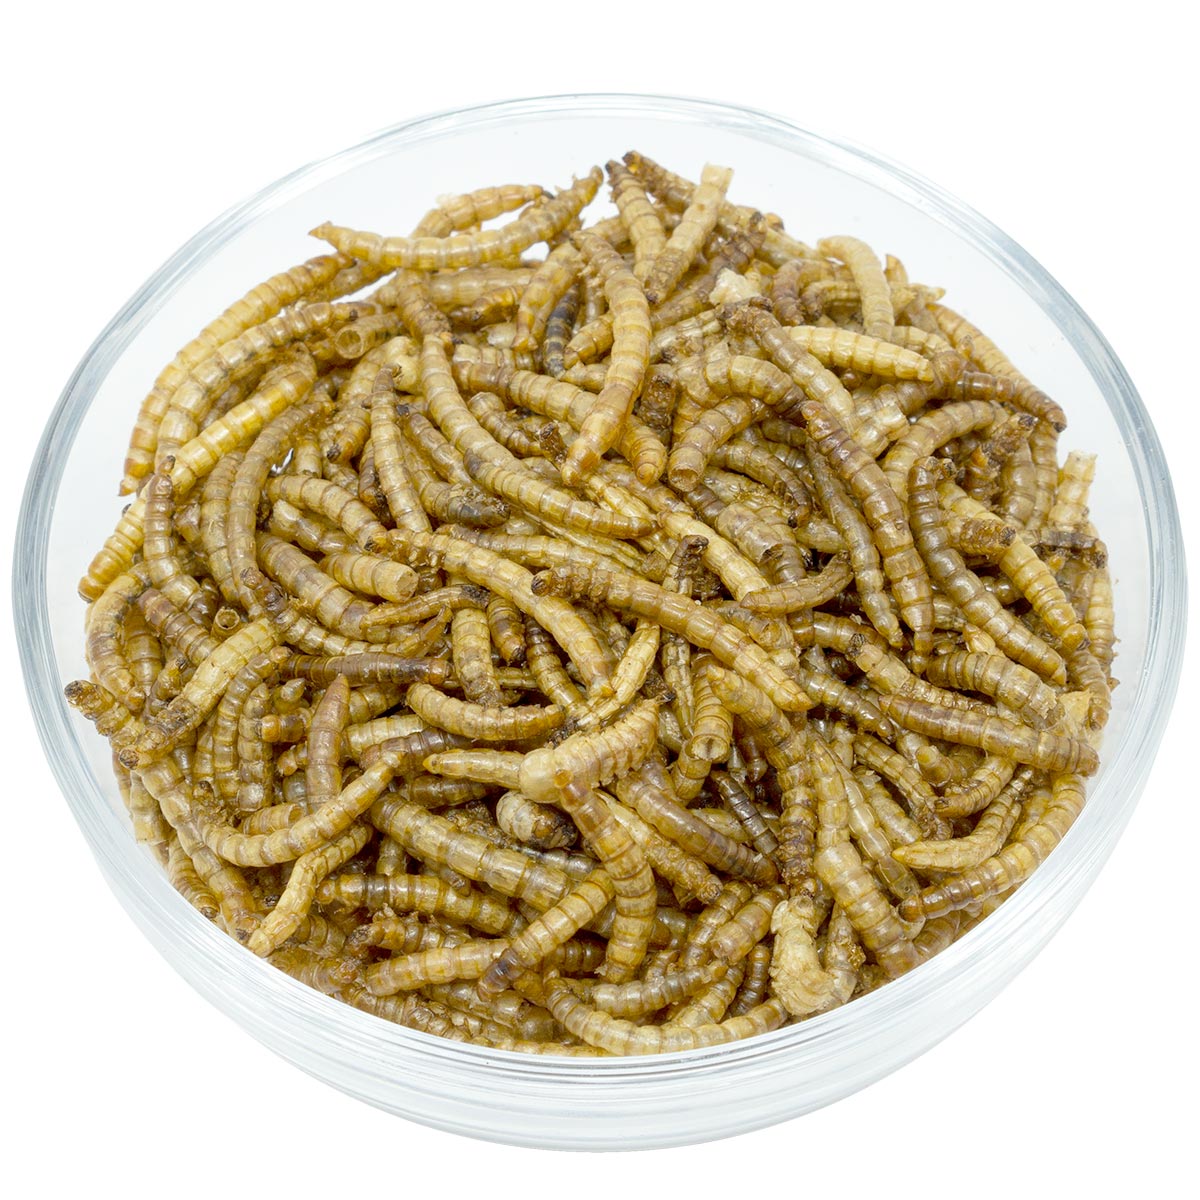 Leimüller Mealworms dried